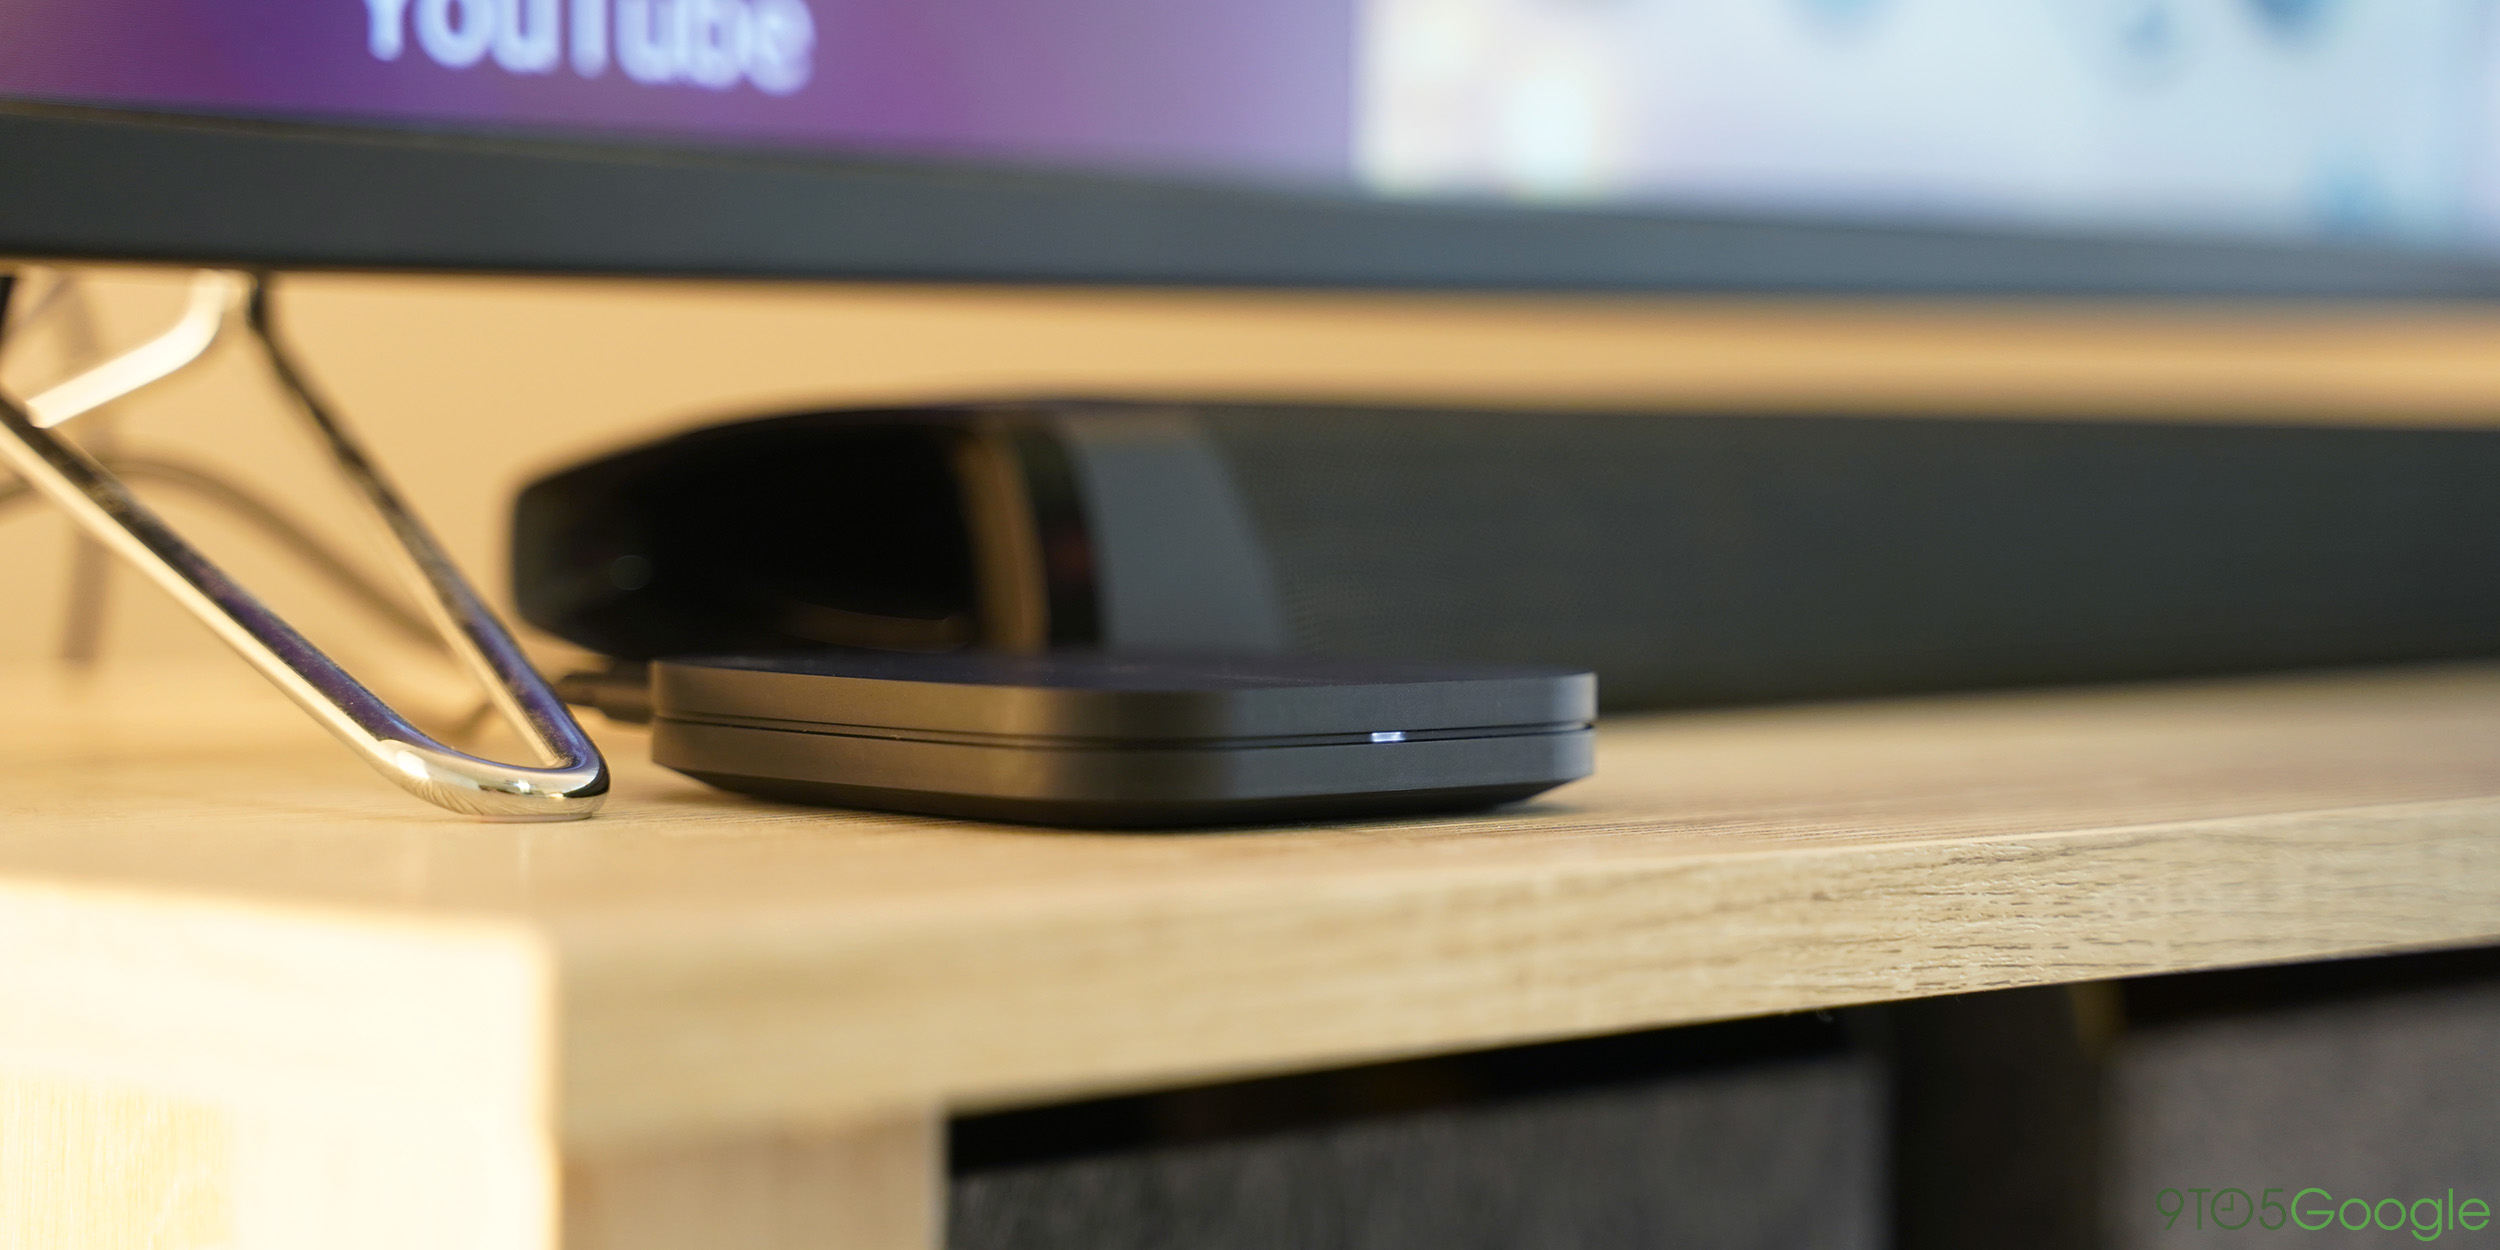 Xiaomi Mi Box 4 Coming to U.S. With Android TV, Google Assistant